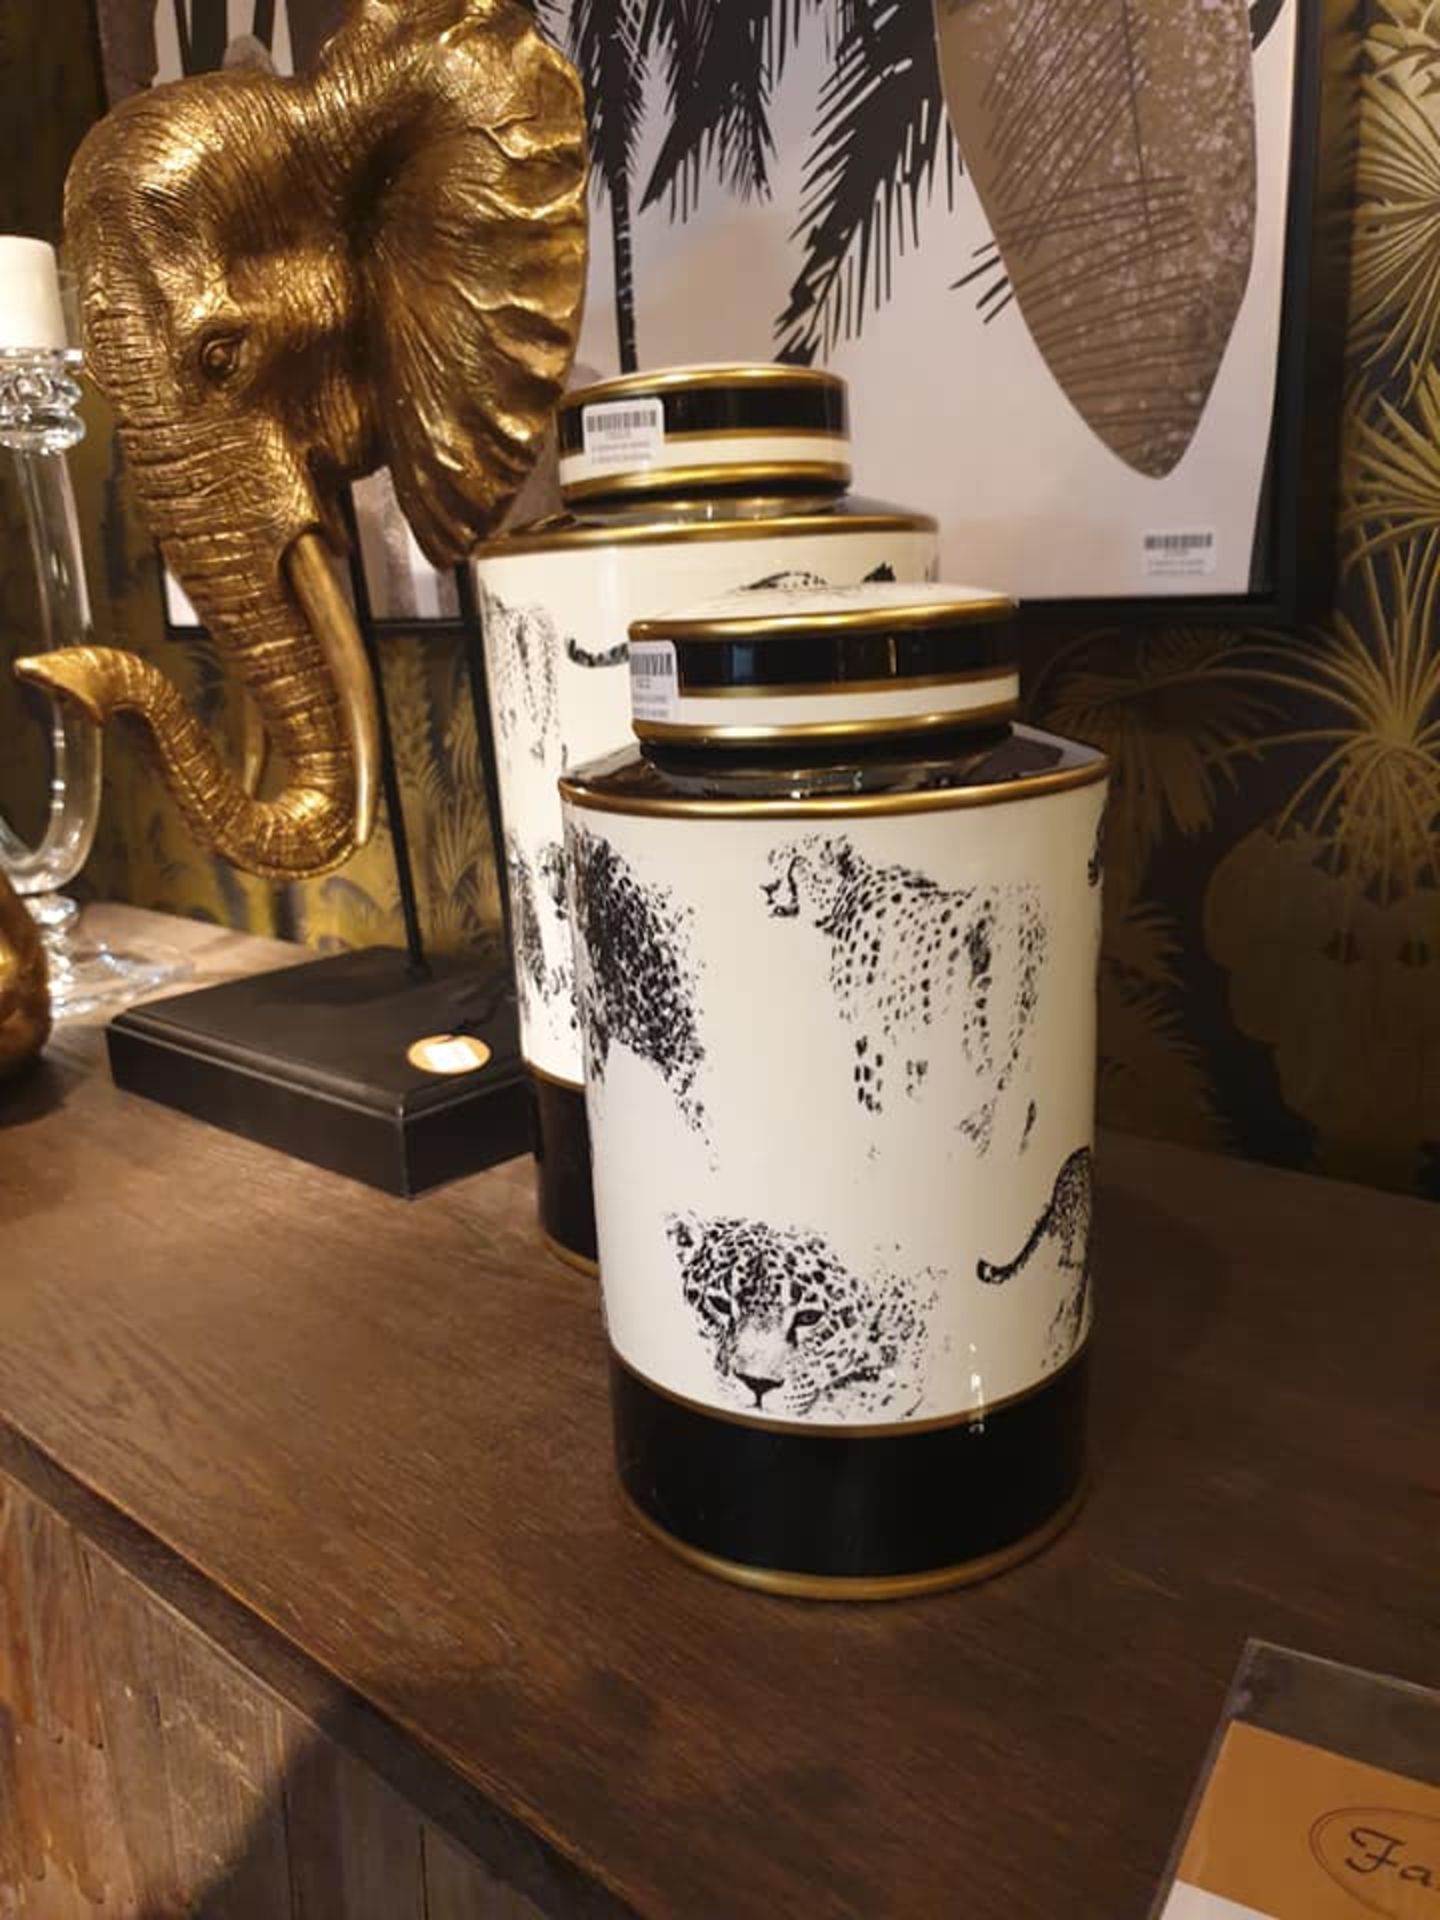 Safari - A Set Of 2 Stunning Porcelain Canisters In Black, White And Gold Rims Handmade Porcelain - Image 3 of 3